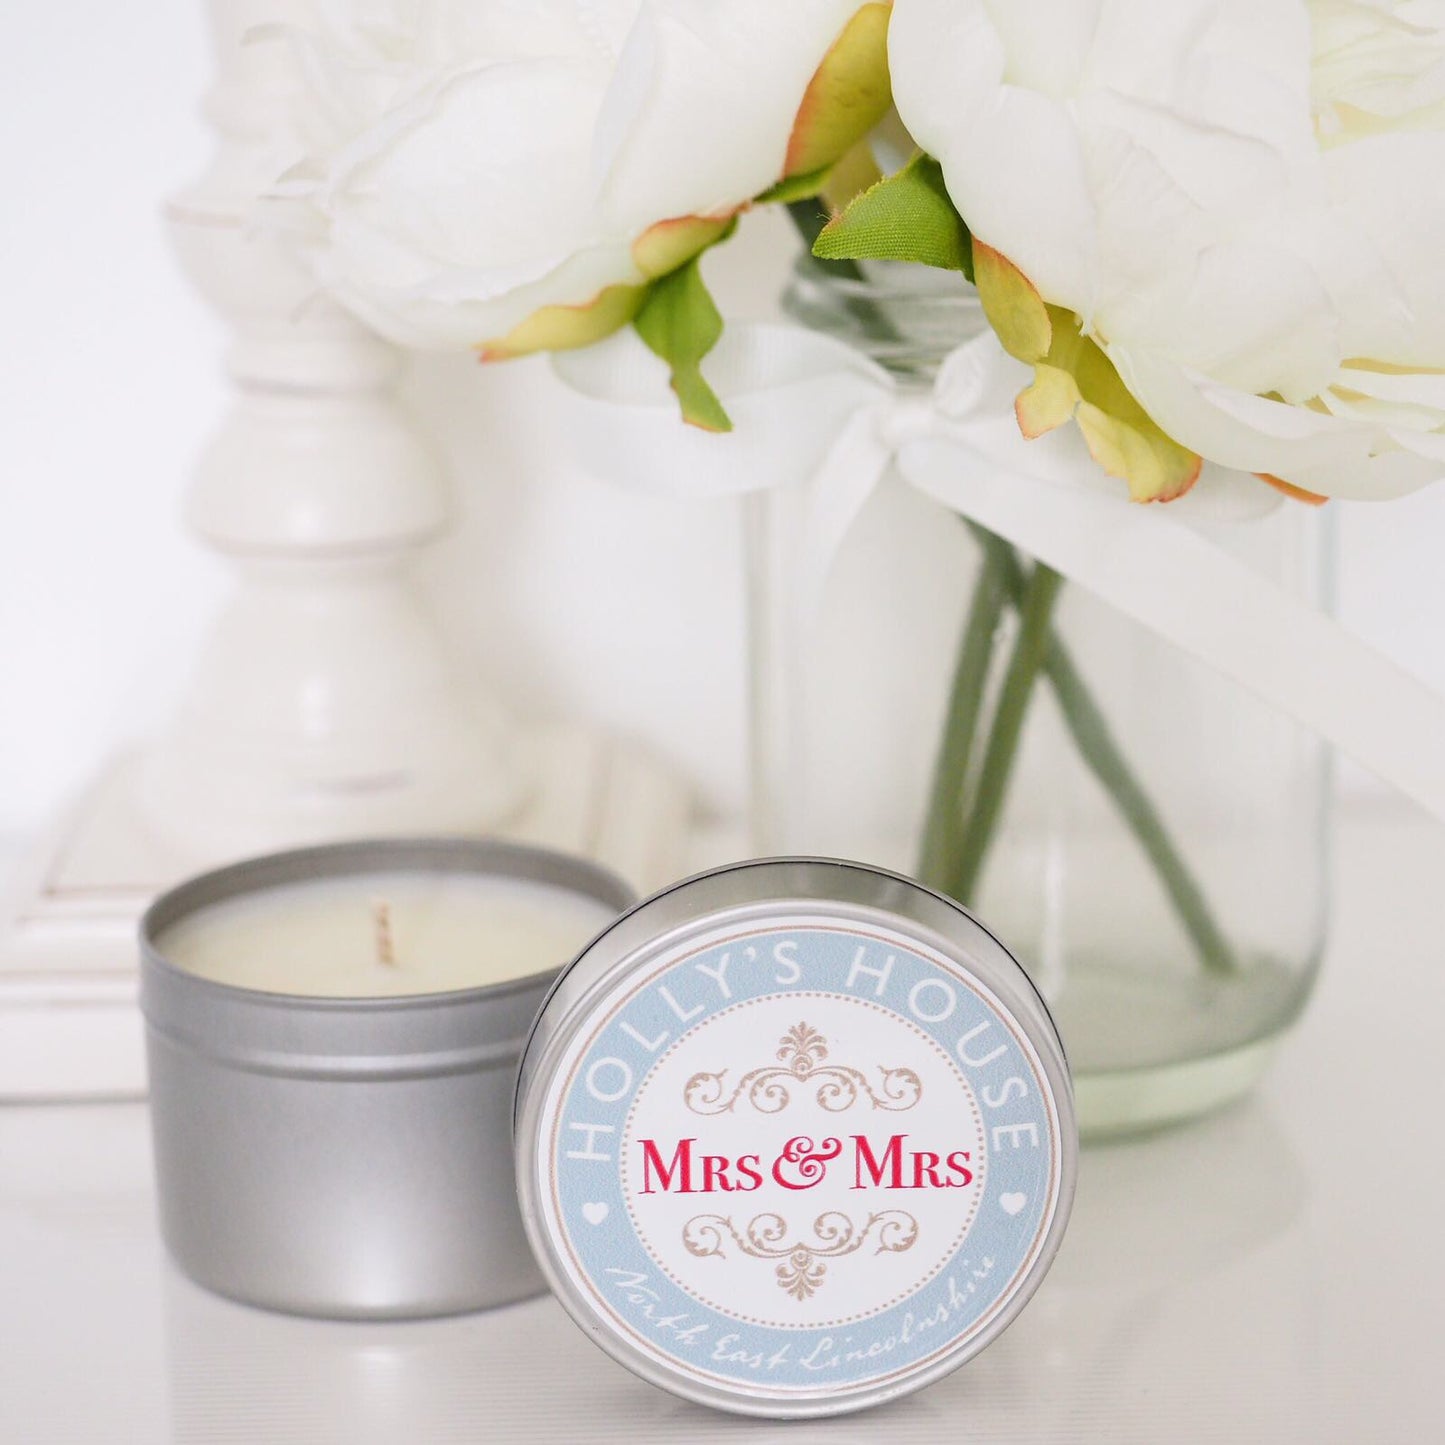 Prosecco & Clementine 100ml Candle Tin